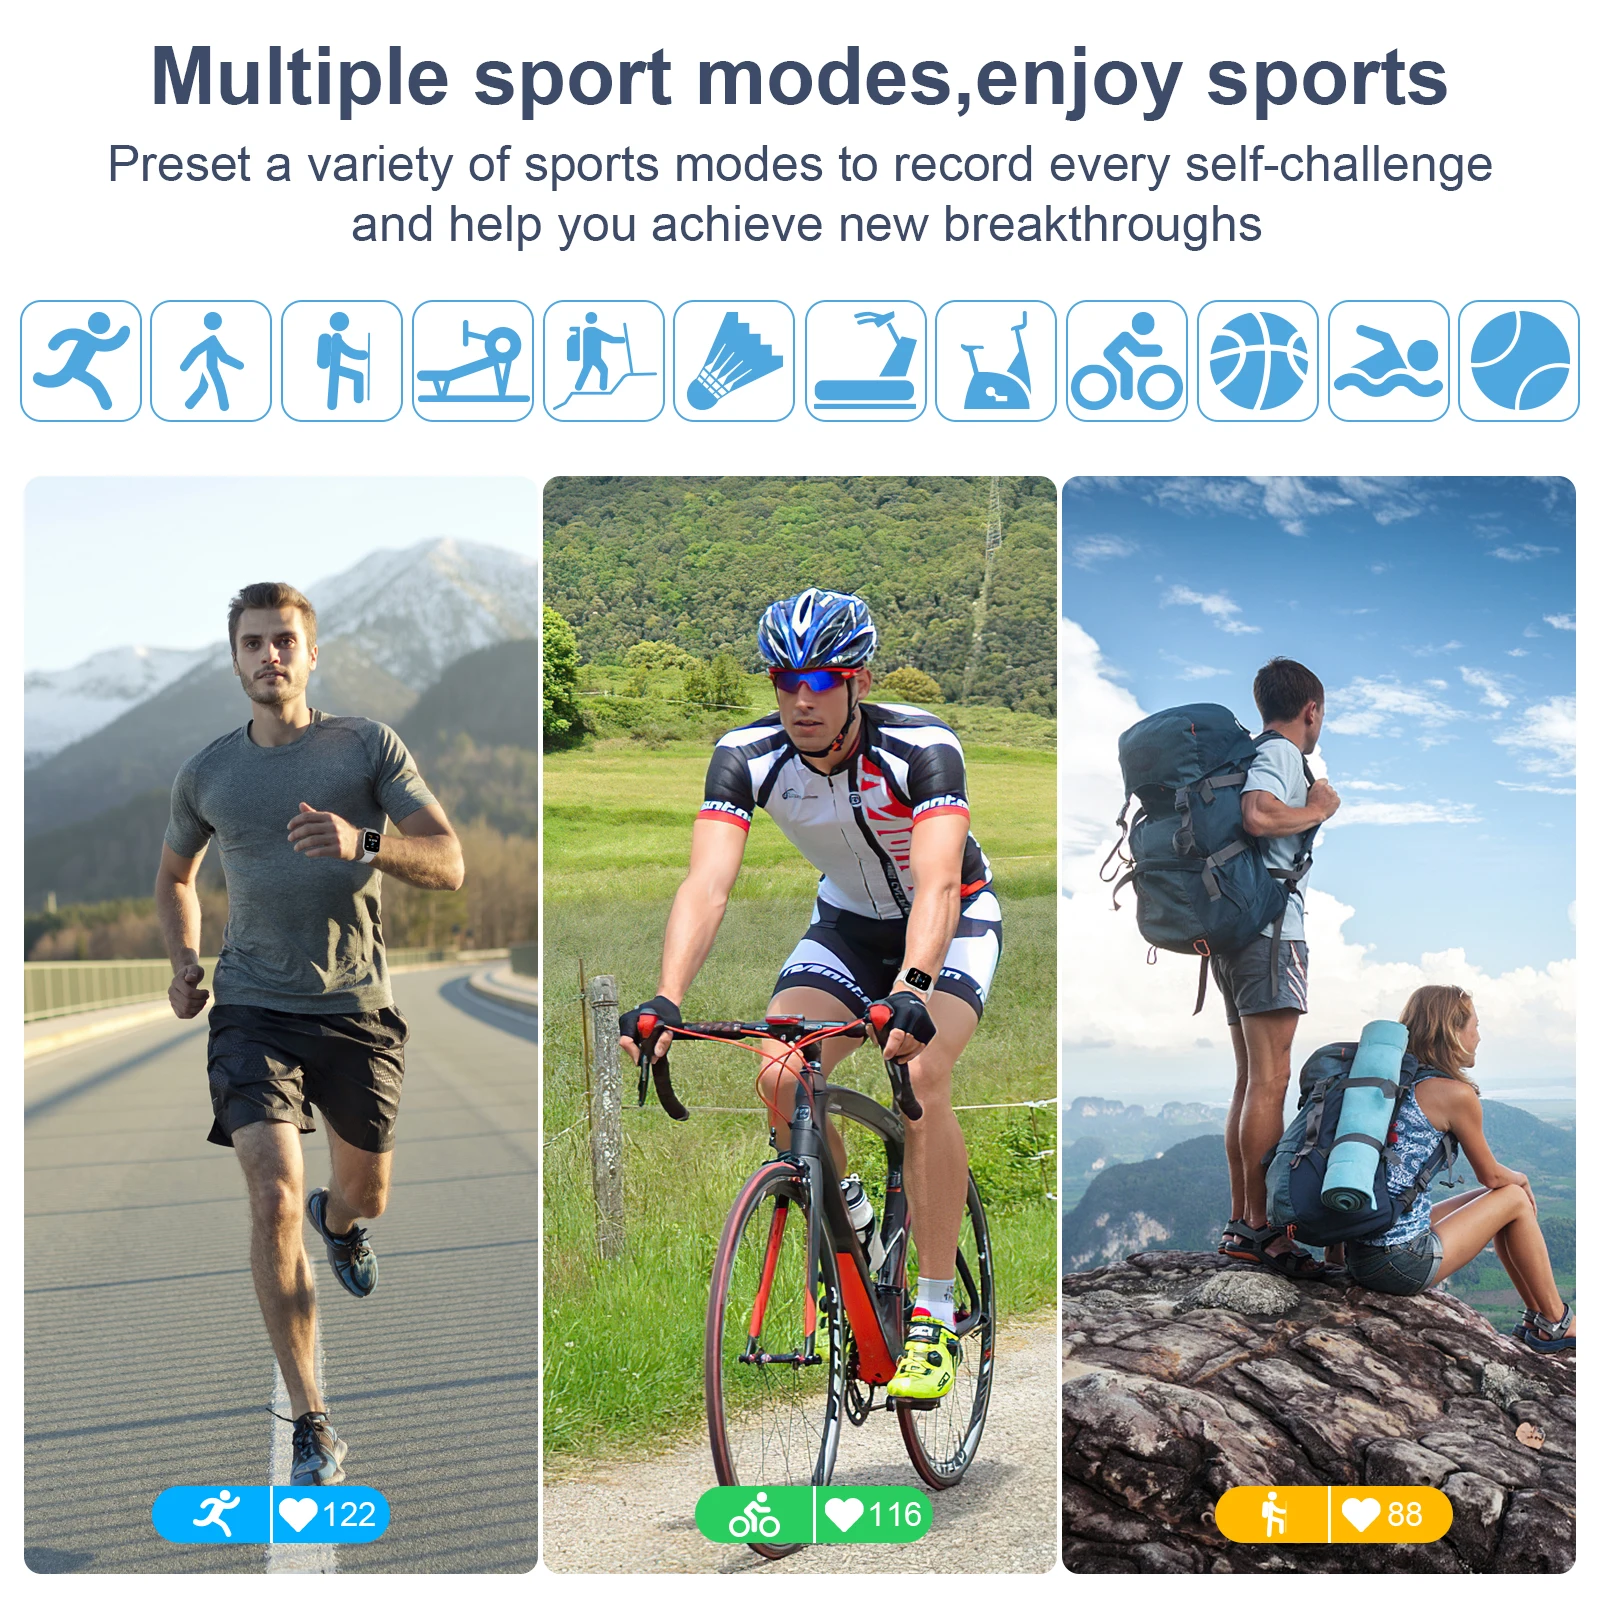 Smartwatch- multiple sports modes- Smart cell direct